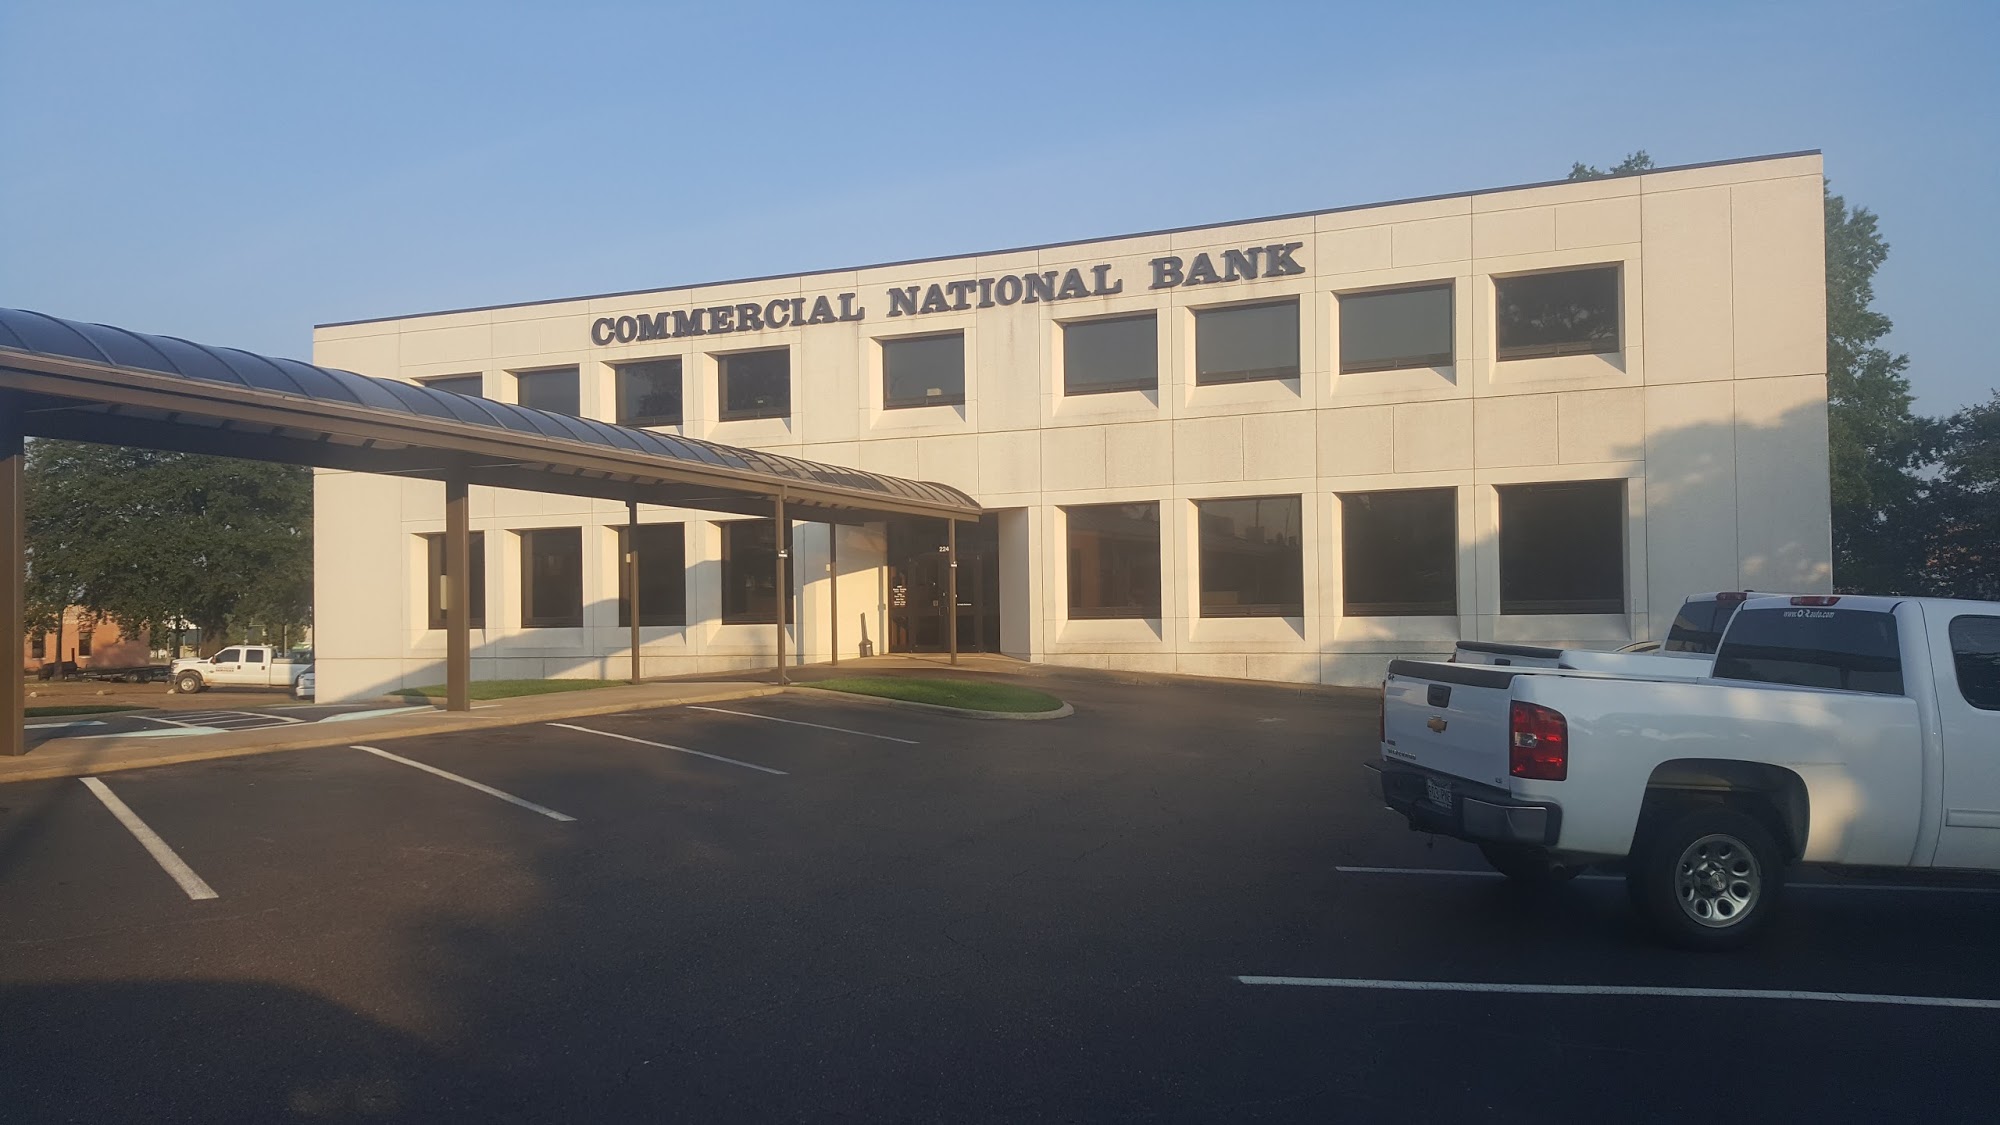 Commercial National Bank